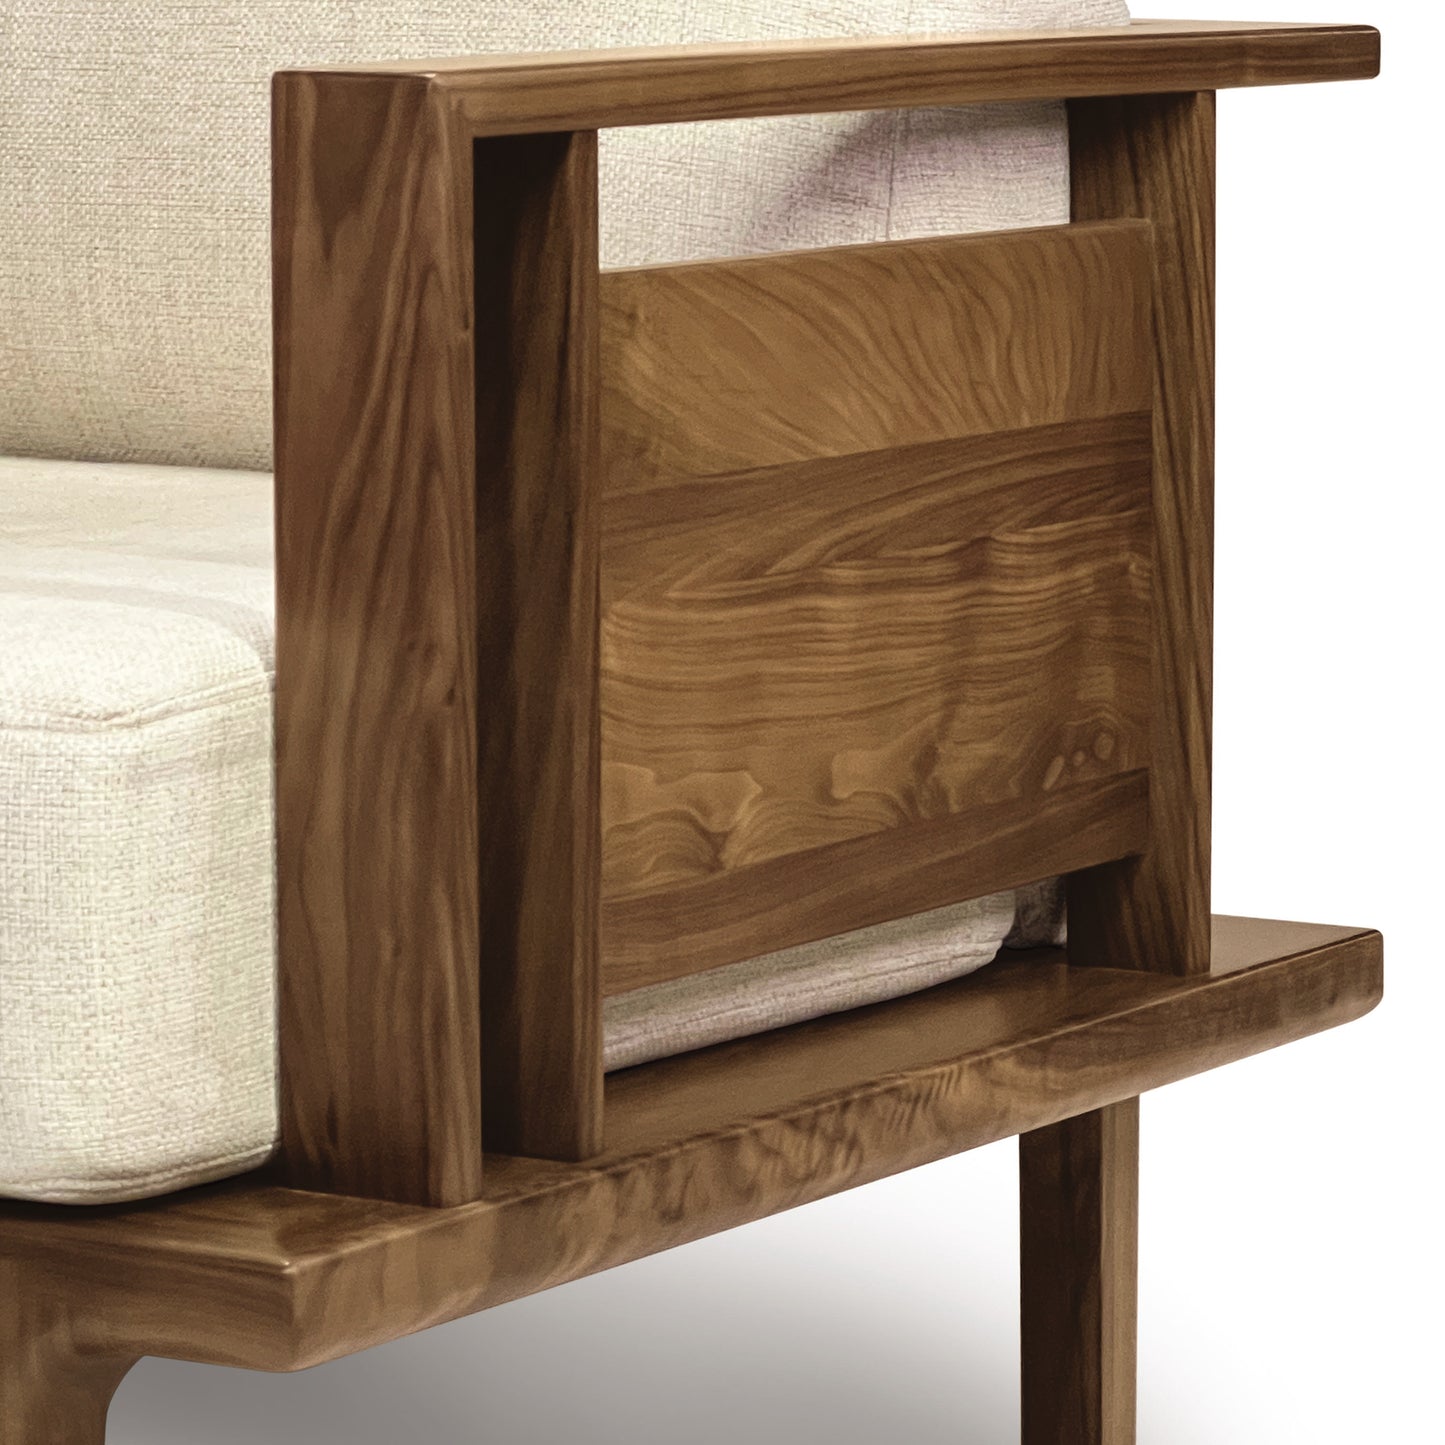 An image of a Sierra Walnut Upholstered Chair by Copeland Furniture.